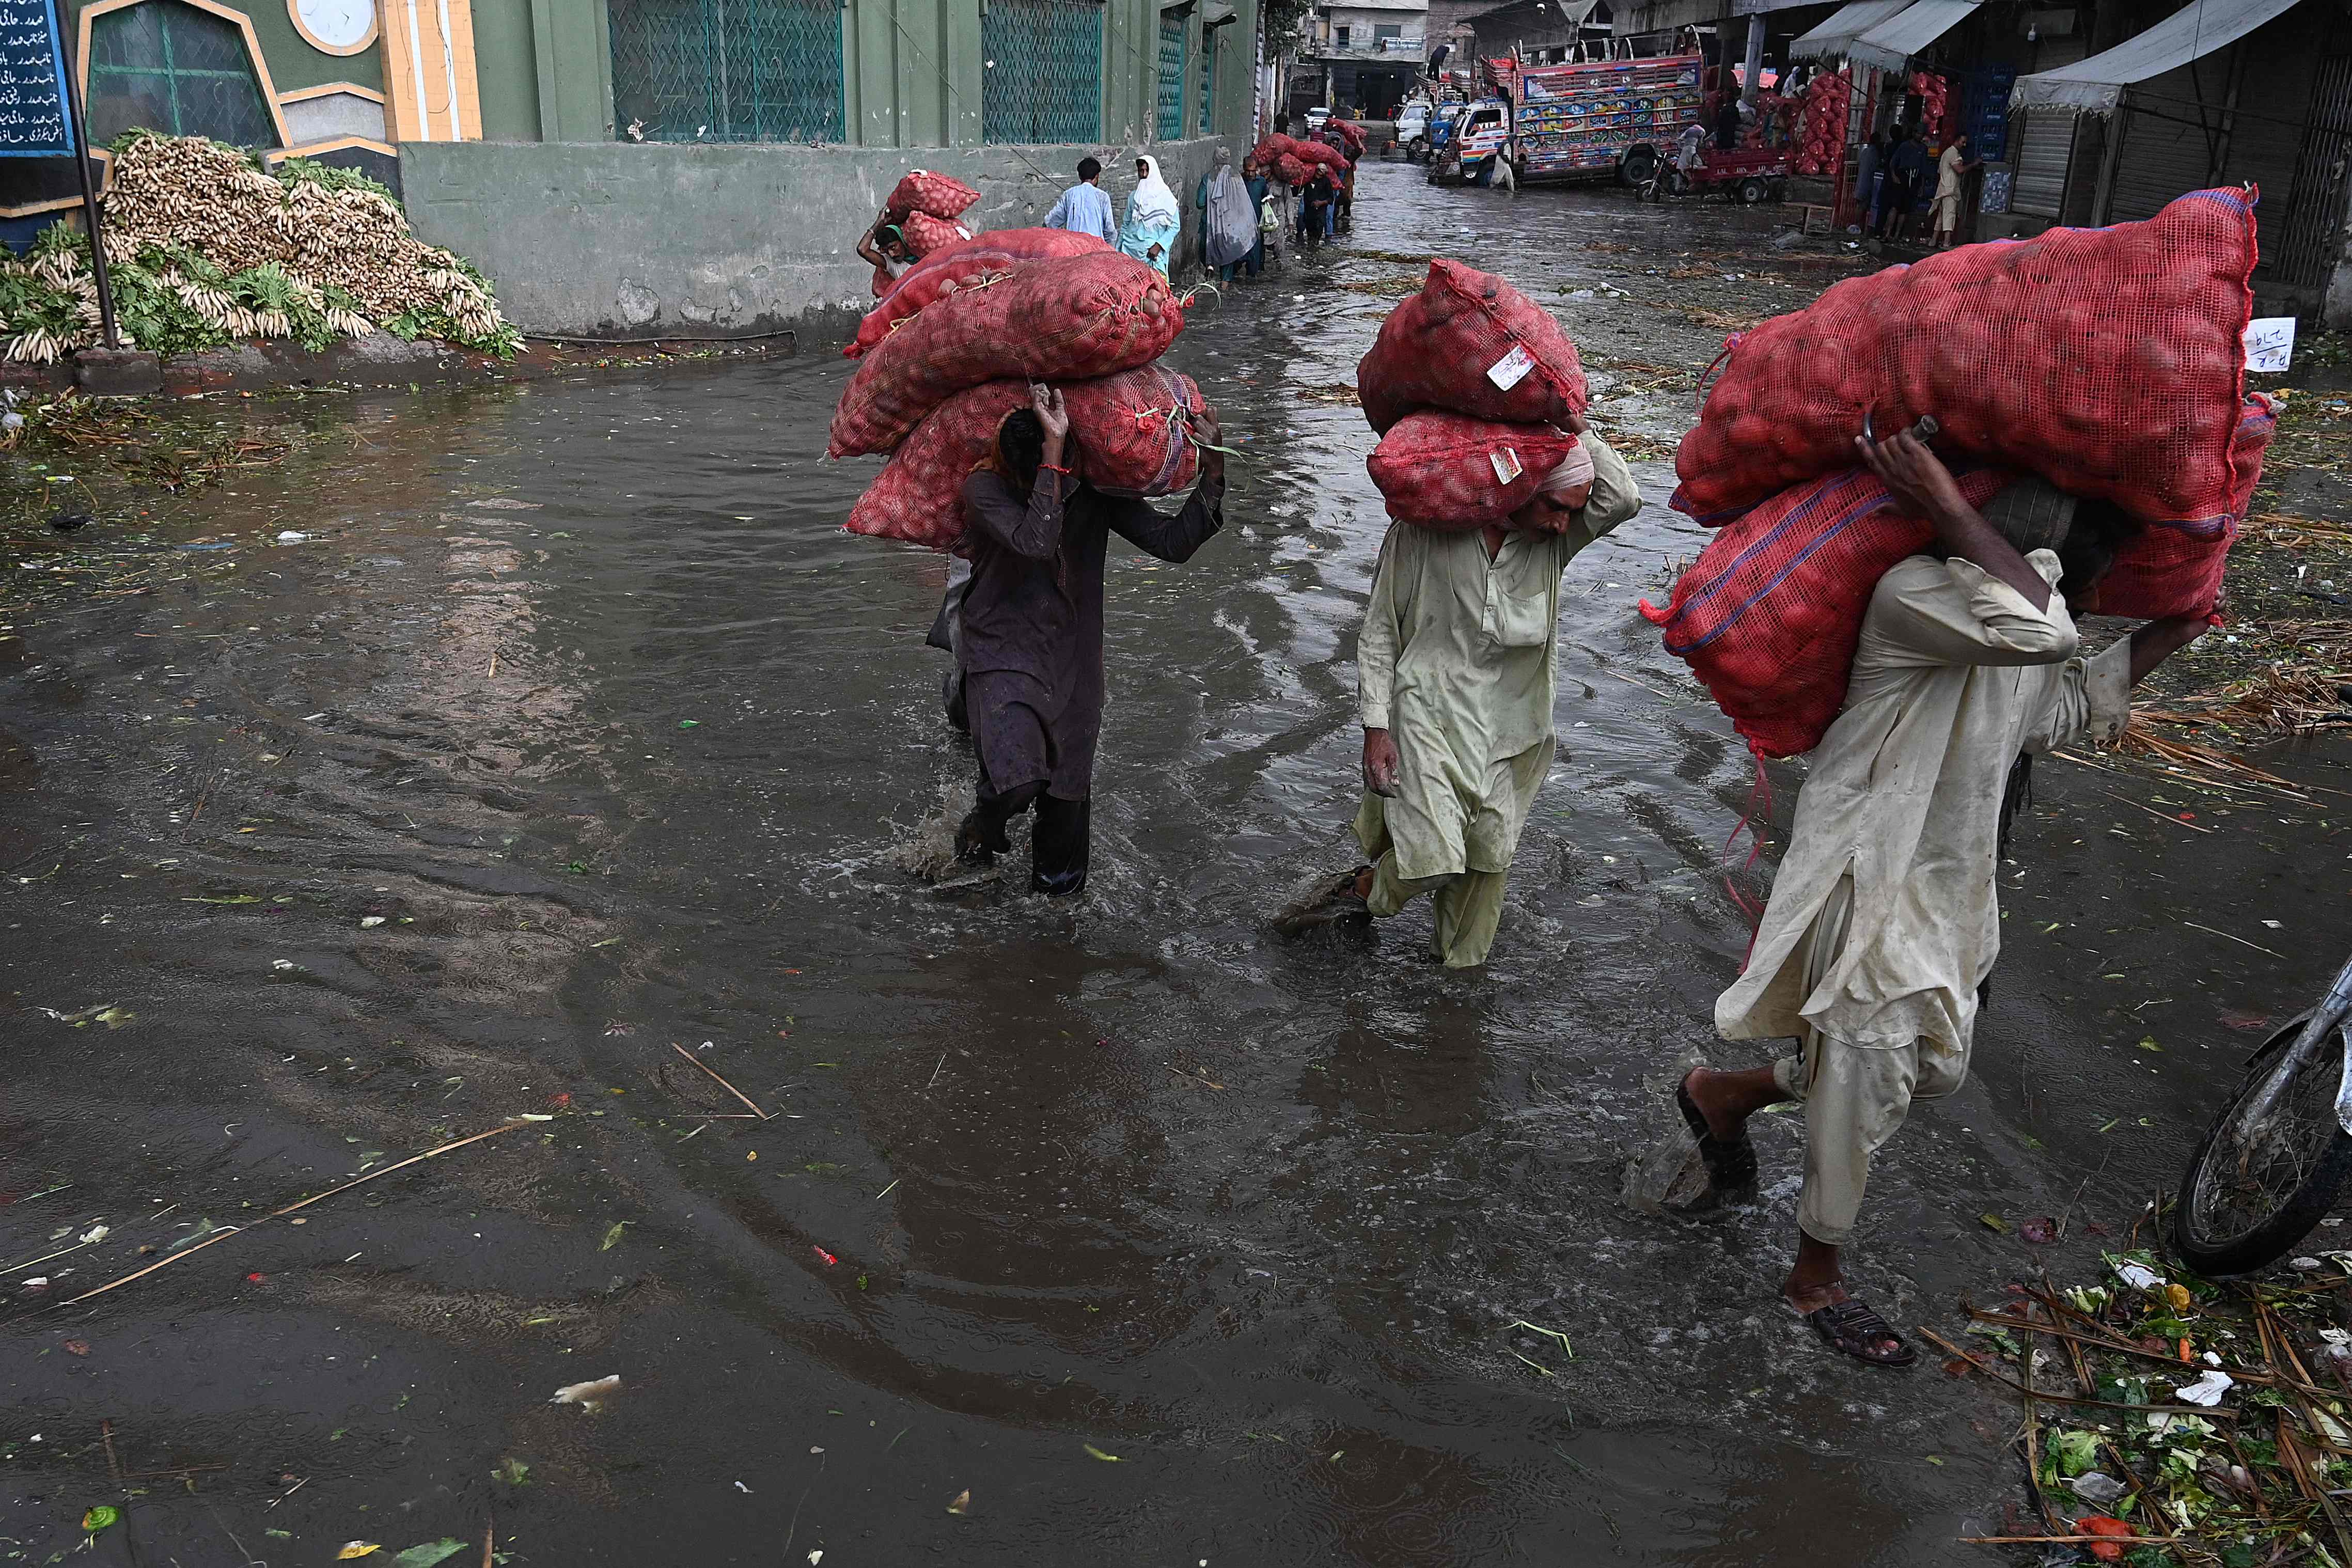 Labourers carry sacks of potato as they wade amid a flooded market in Lahore